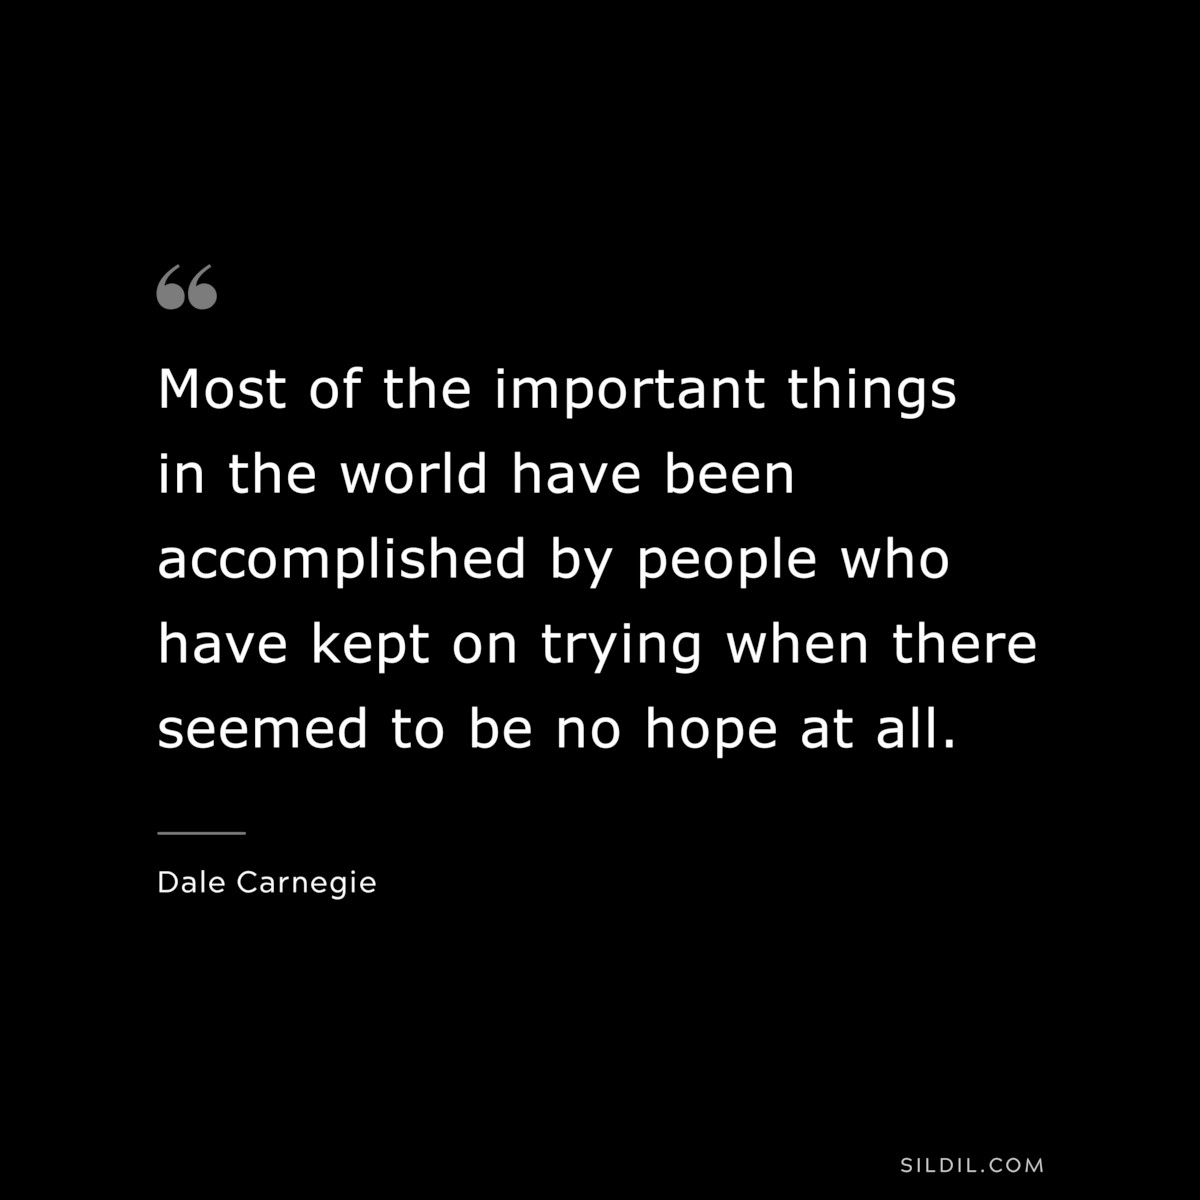 Most of the important things in the world have been accomplished by people who have kept on trying when there seemed to be no hope at all. ― Dale Carnegie